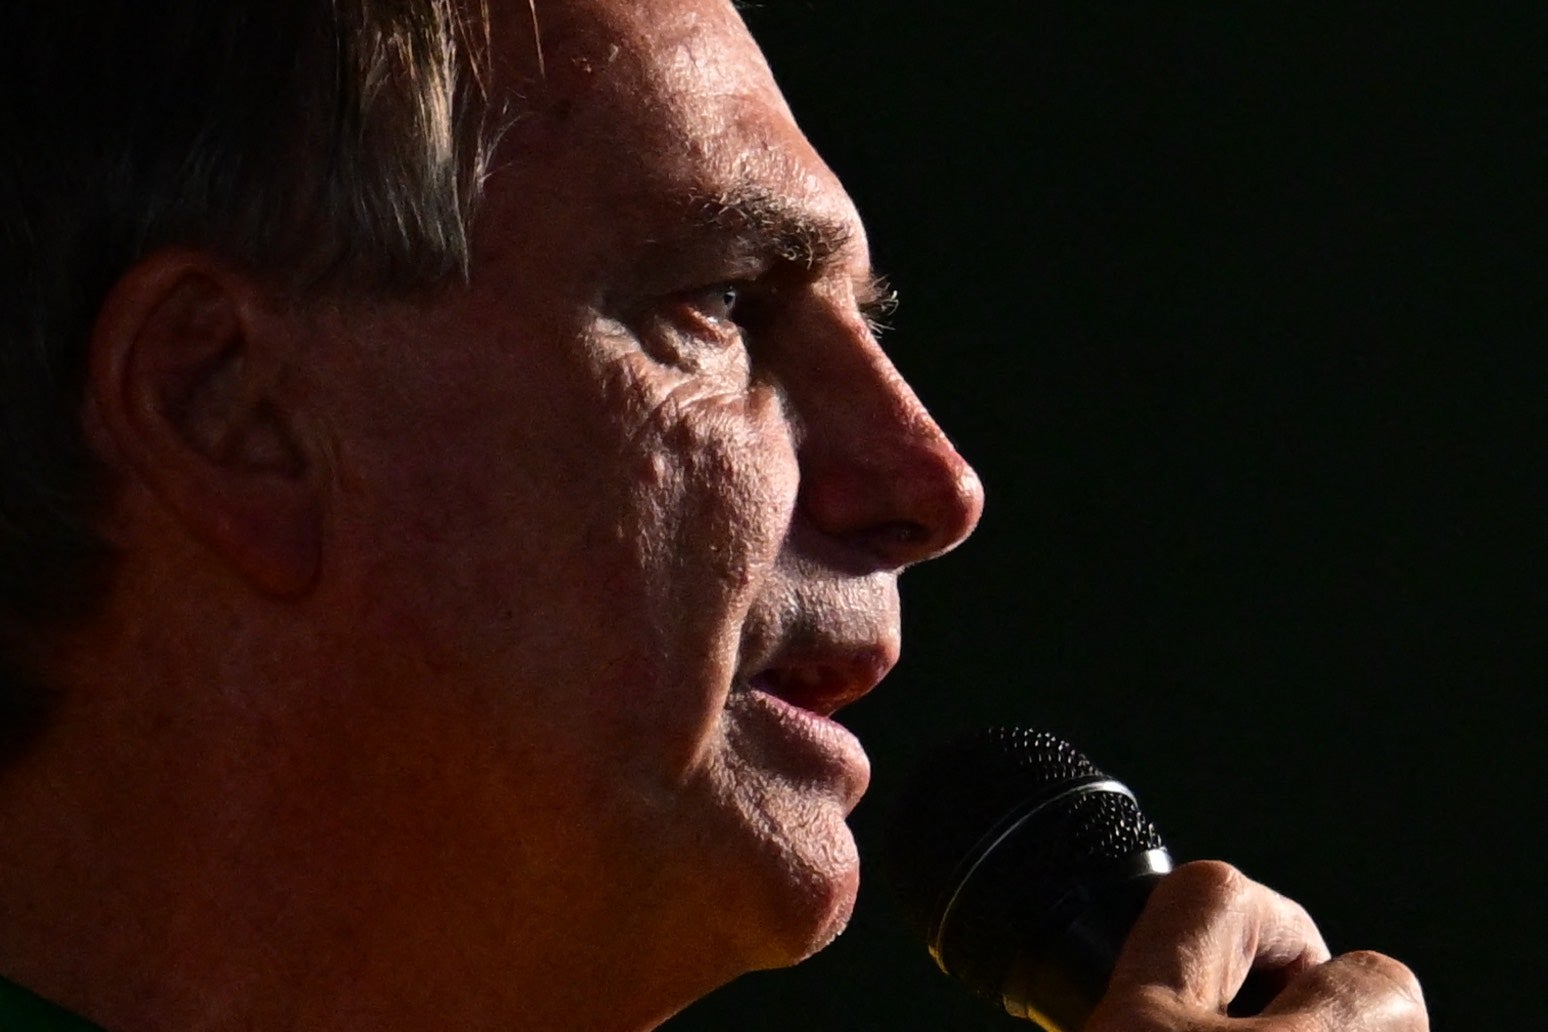 Jair Bolsonaro has been indicted on charges related to suspected falsification of his Covid-19 vaccine records